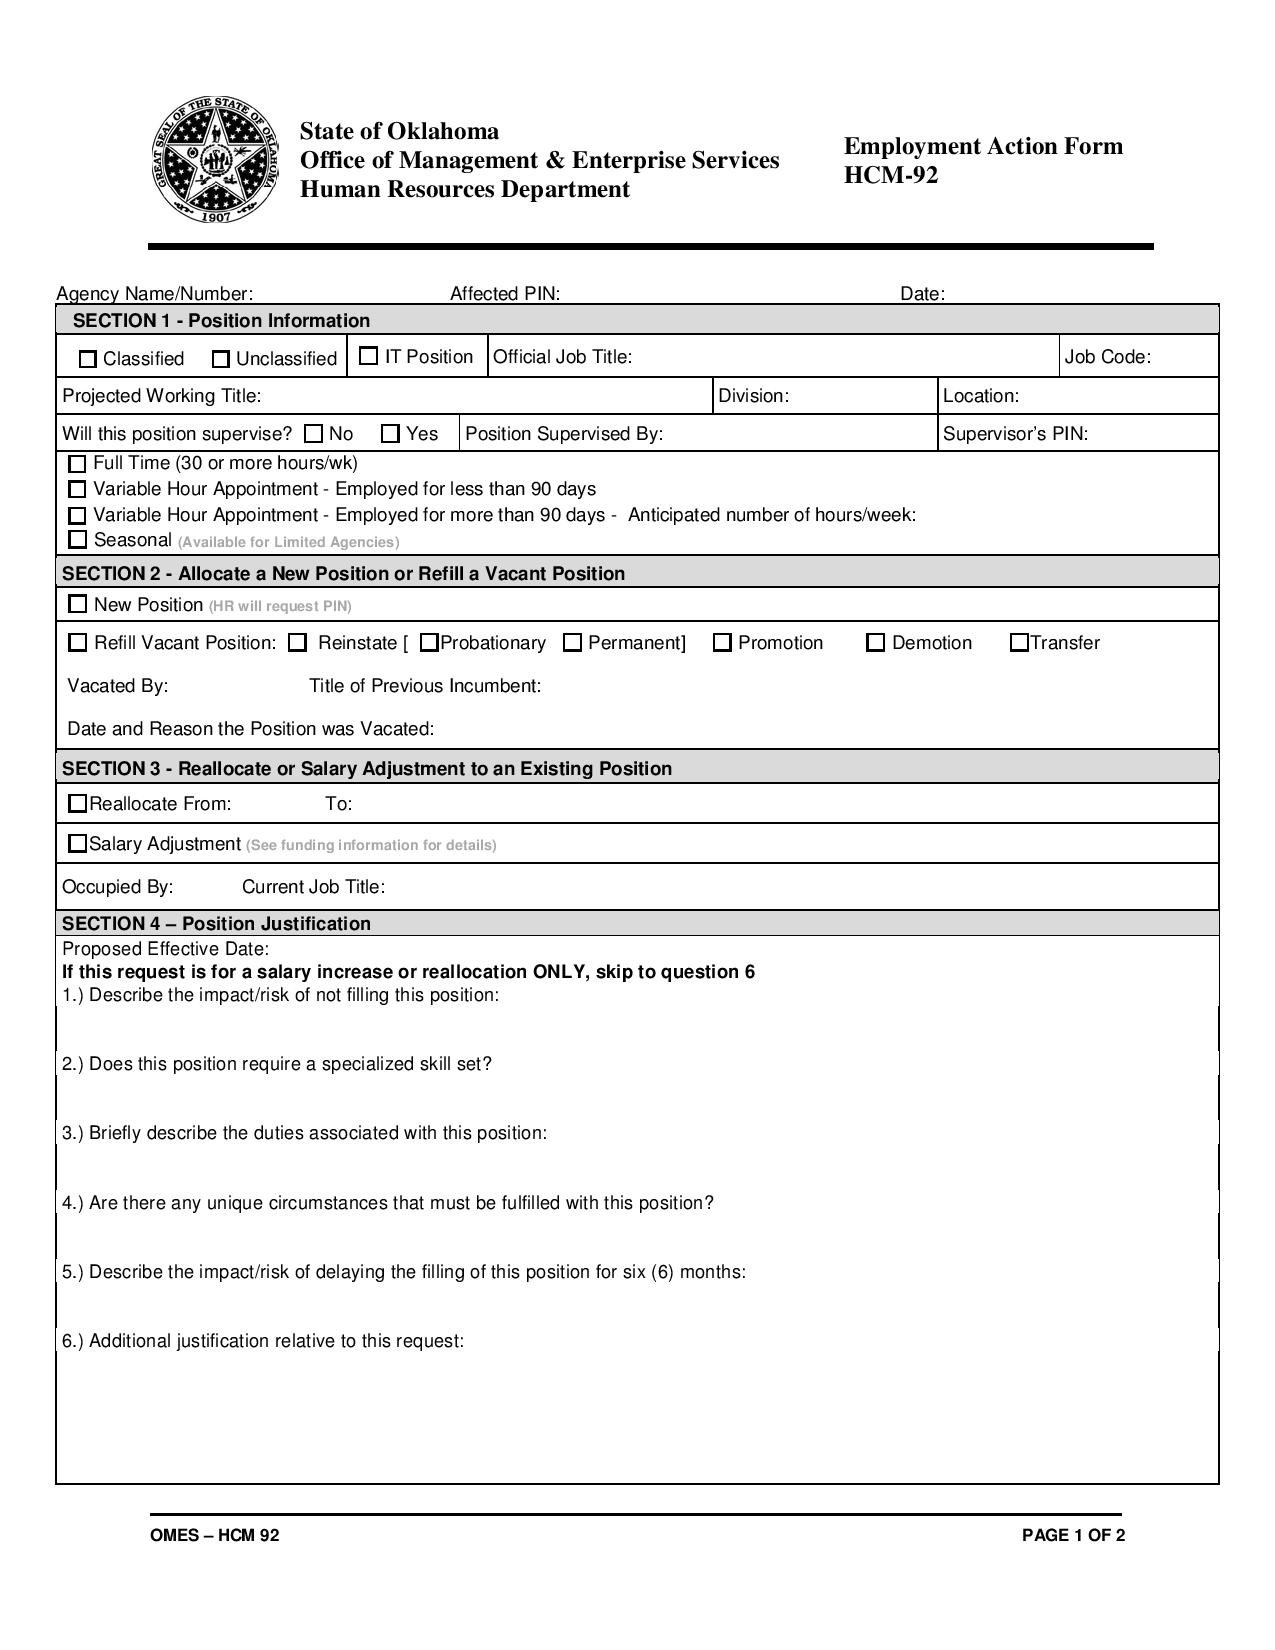 employment action form 1 page 001